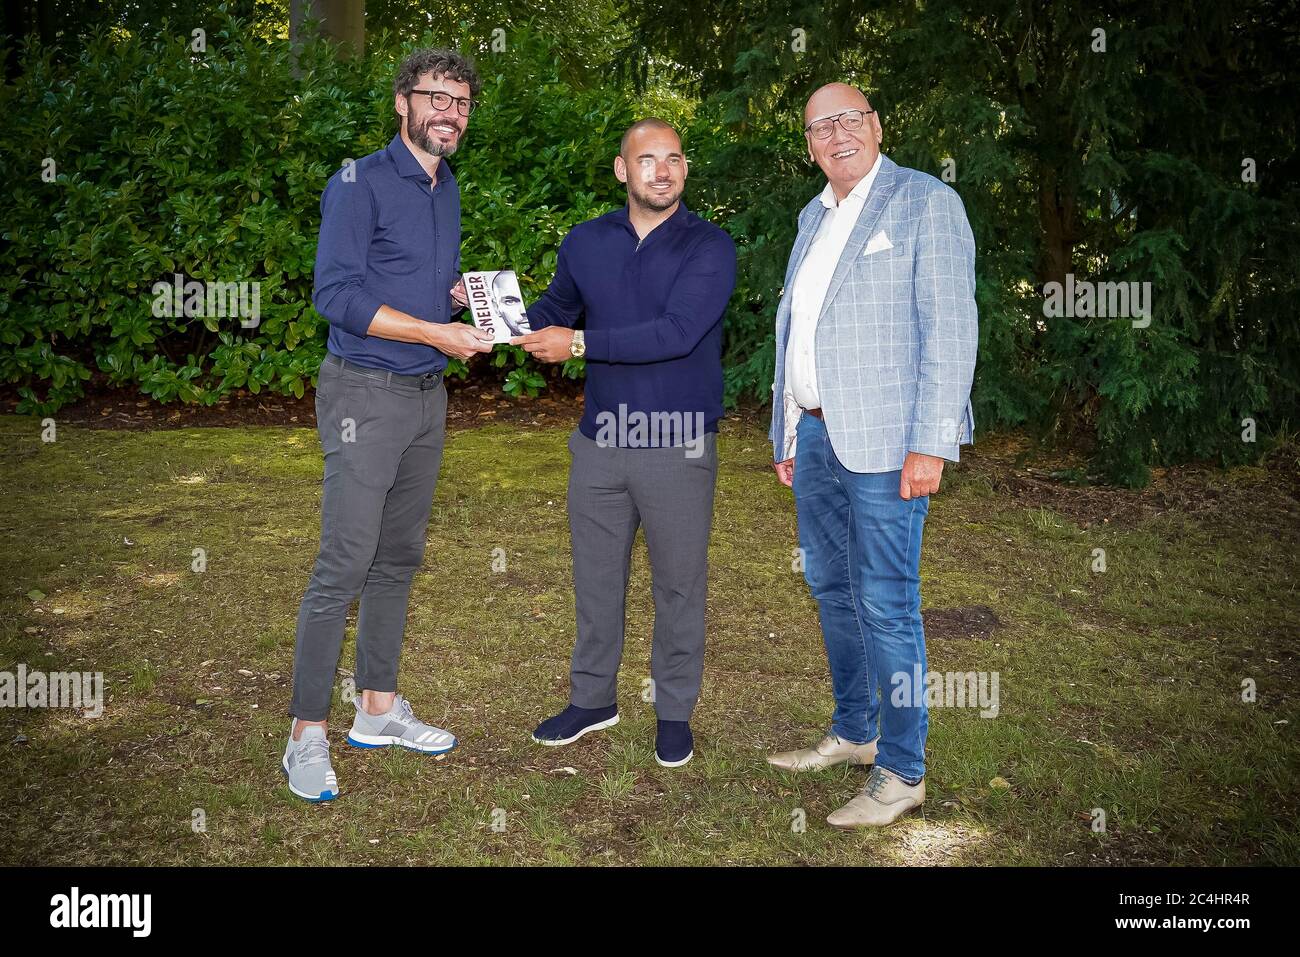 DOORN, Wesley Sneijder (M) presents his book Wesley, a biography written by Kees Jansma (R), Mark van Bommel (L) presents the first book, 27-06-2020, Oranjerie Doorn Credit: Pro Shots/Alamy Live News Stock Photo